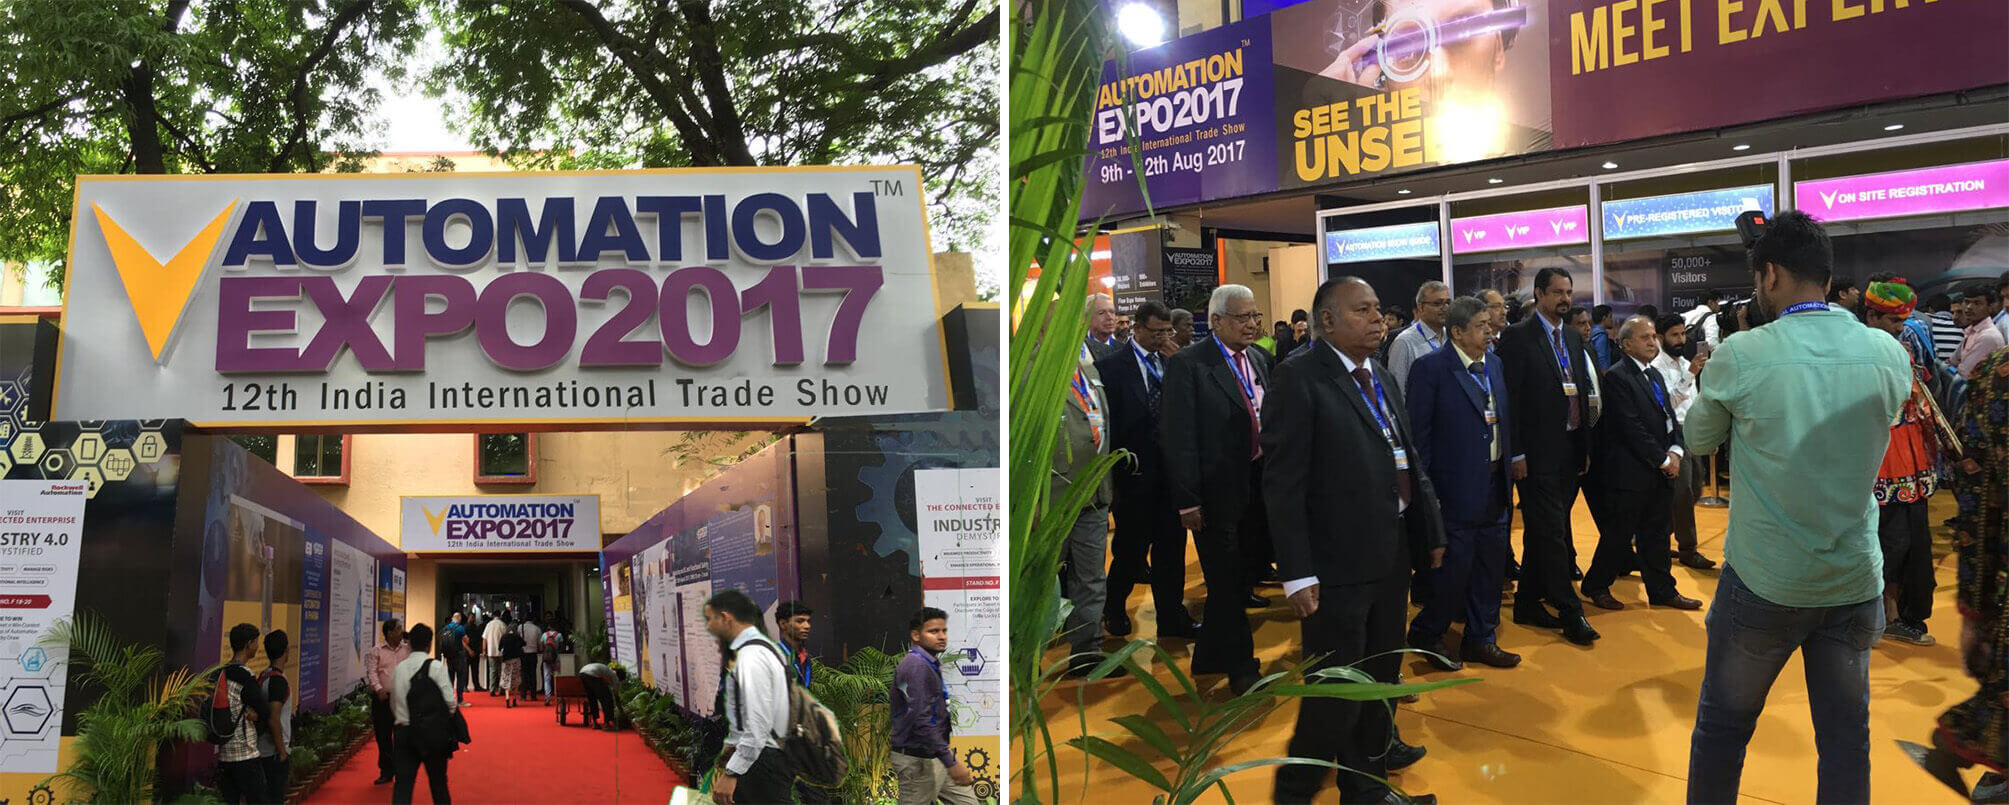 India Automation Expo 2017•High popularity and New Experience